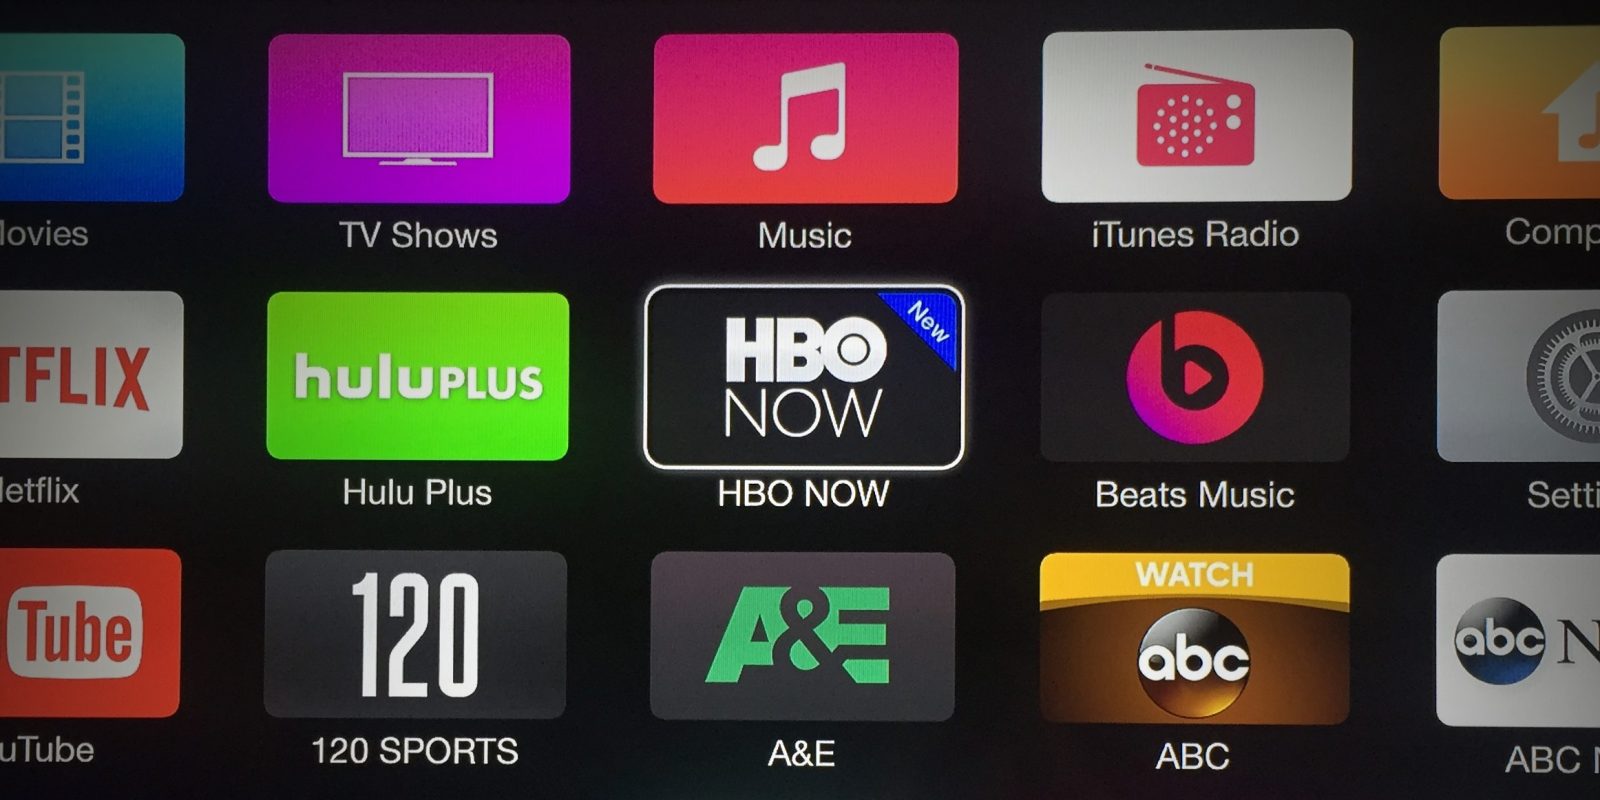 How to use hbo now app on macbook